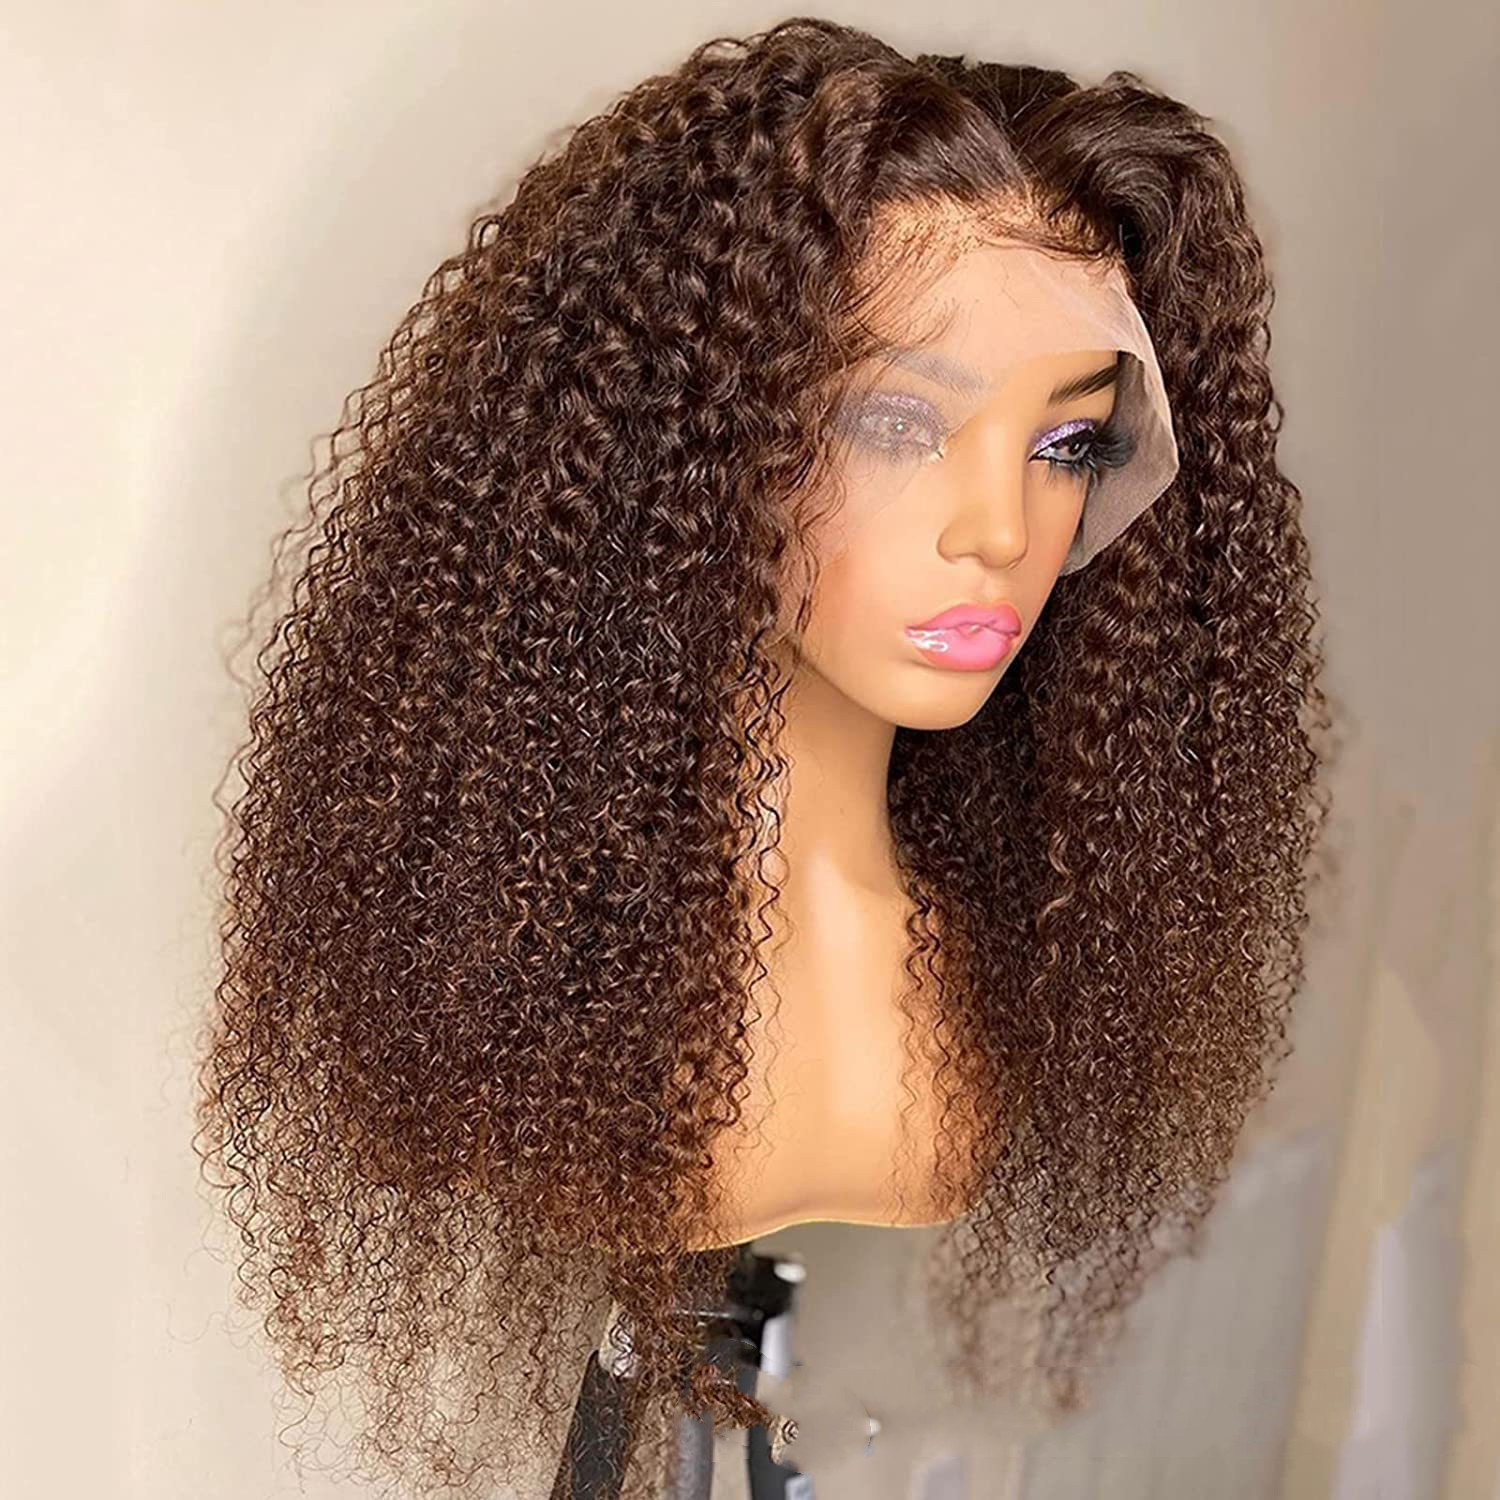 Premium Curly Synthetic Lace Front Wig